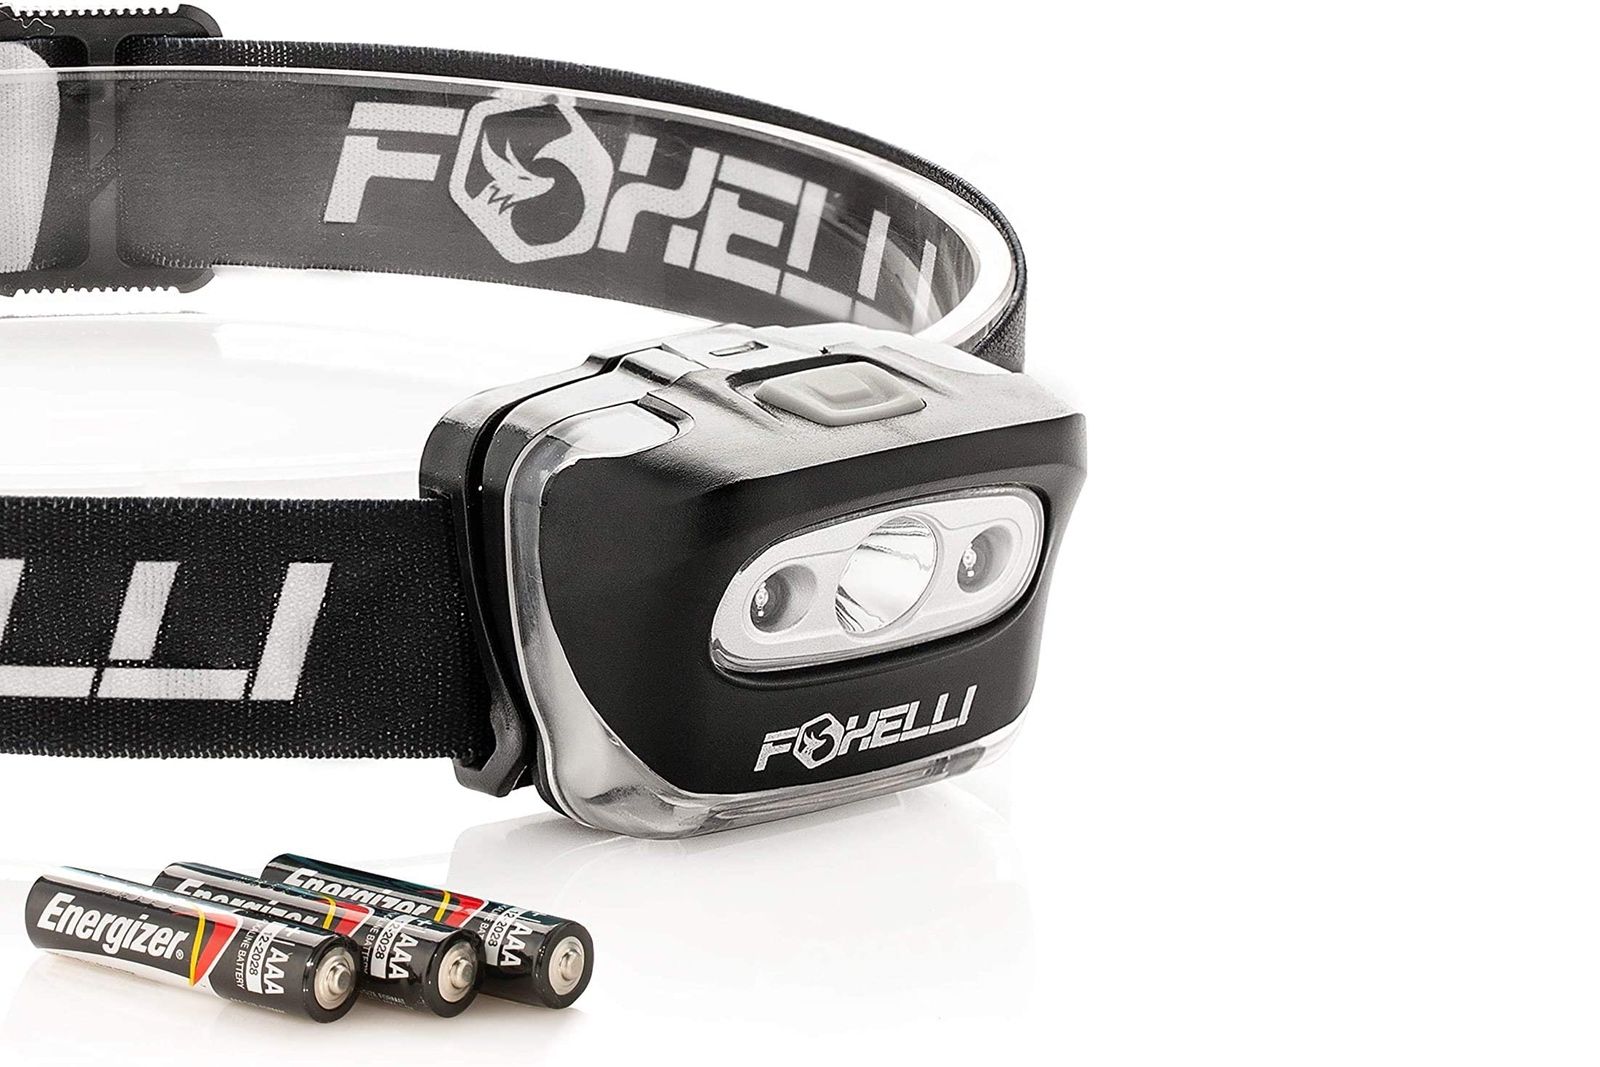 Best headlamps 2021: Light the path ahead with these hands-free torches photo 2